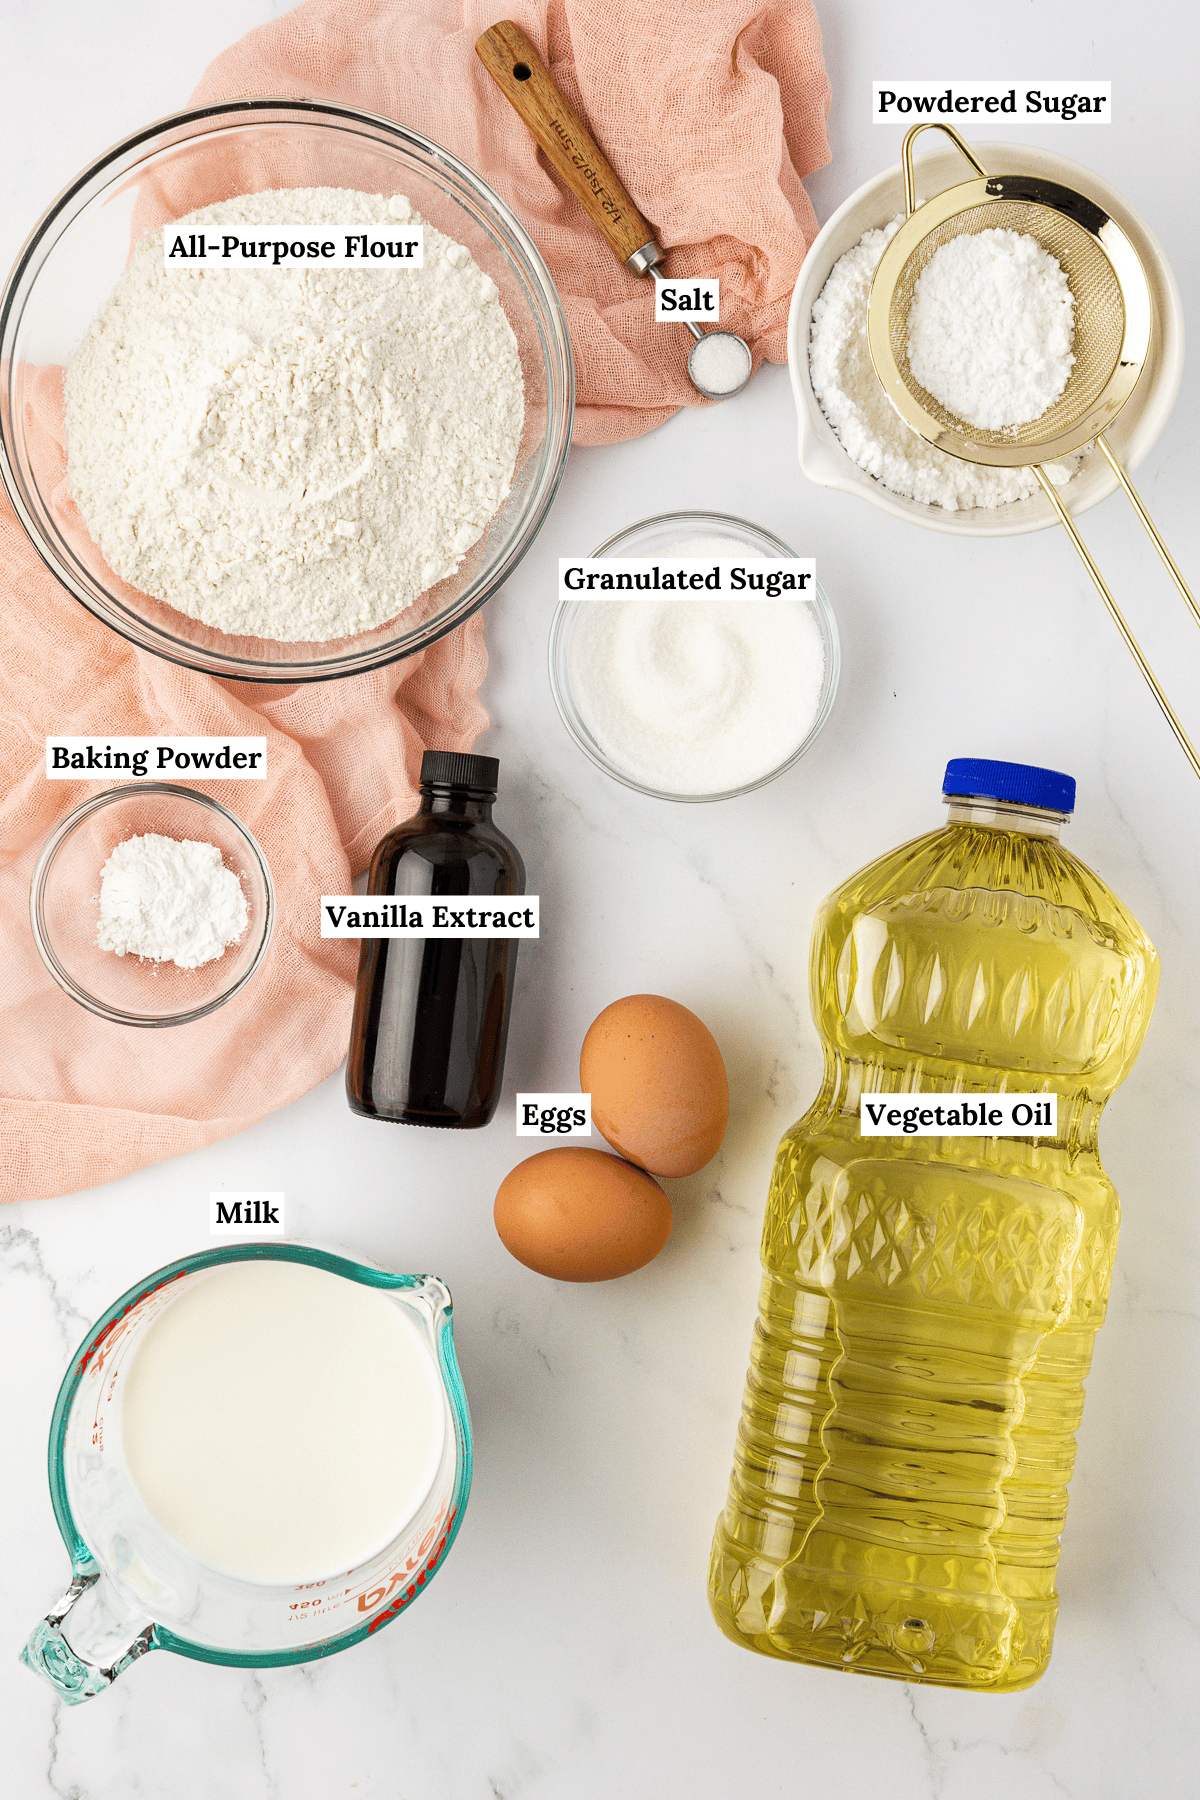 over head view of the ingredients for funnel cake including all-purpose flour, salt, powdered sugar, granulated sugar, baking powder, vanilla extract, eggs, vegetable oil and milk